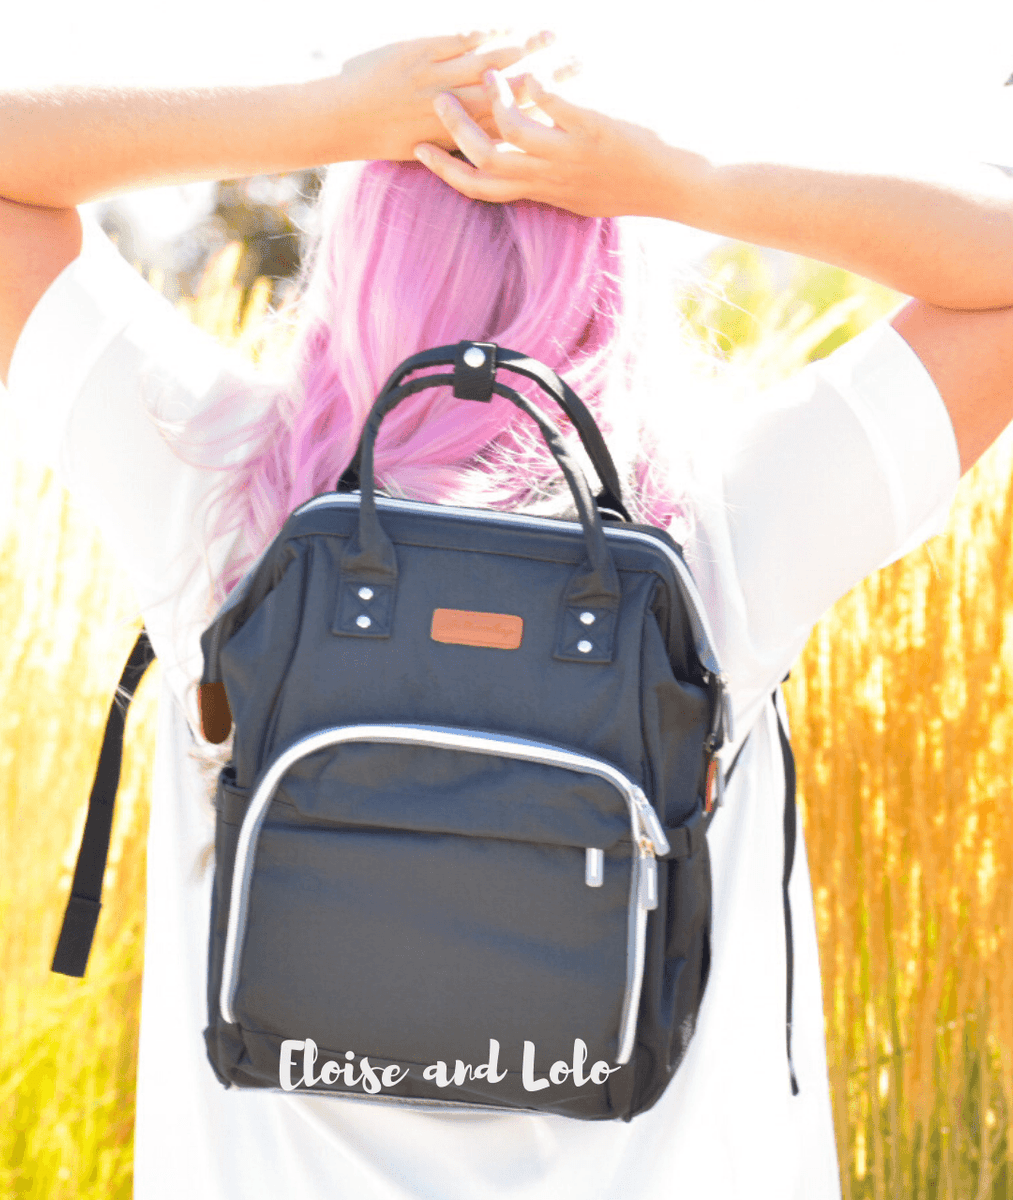 The City Diaper Bag Backpack with Luggage Attachment – Eloise & Lolo